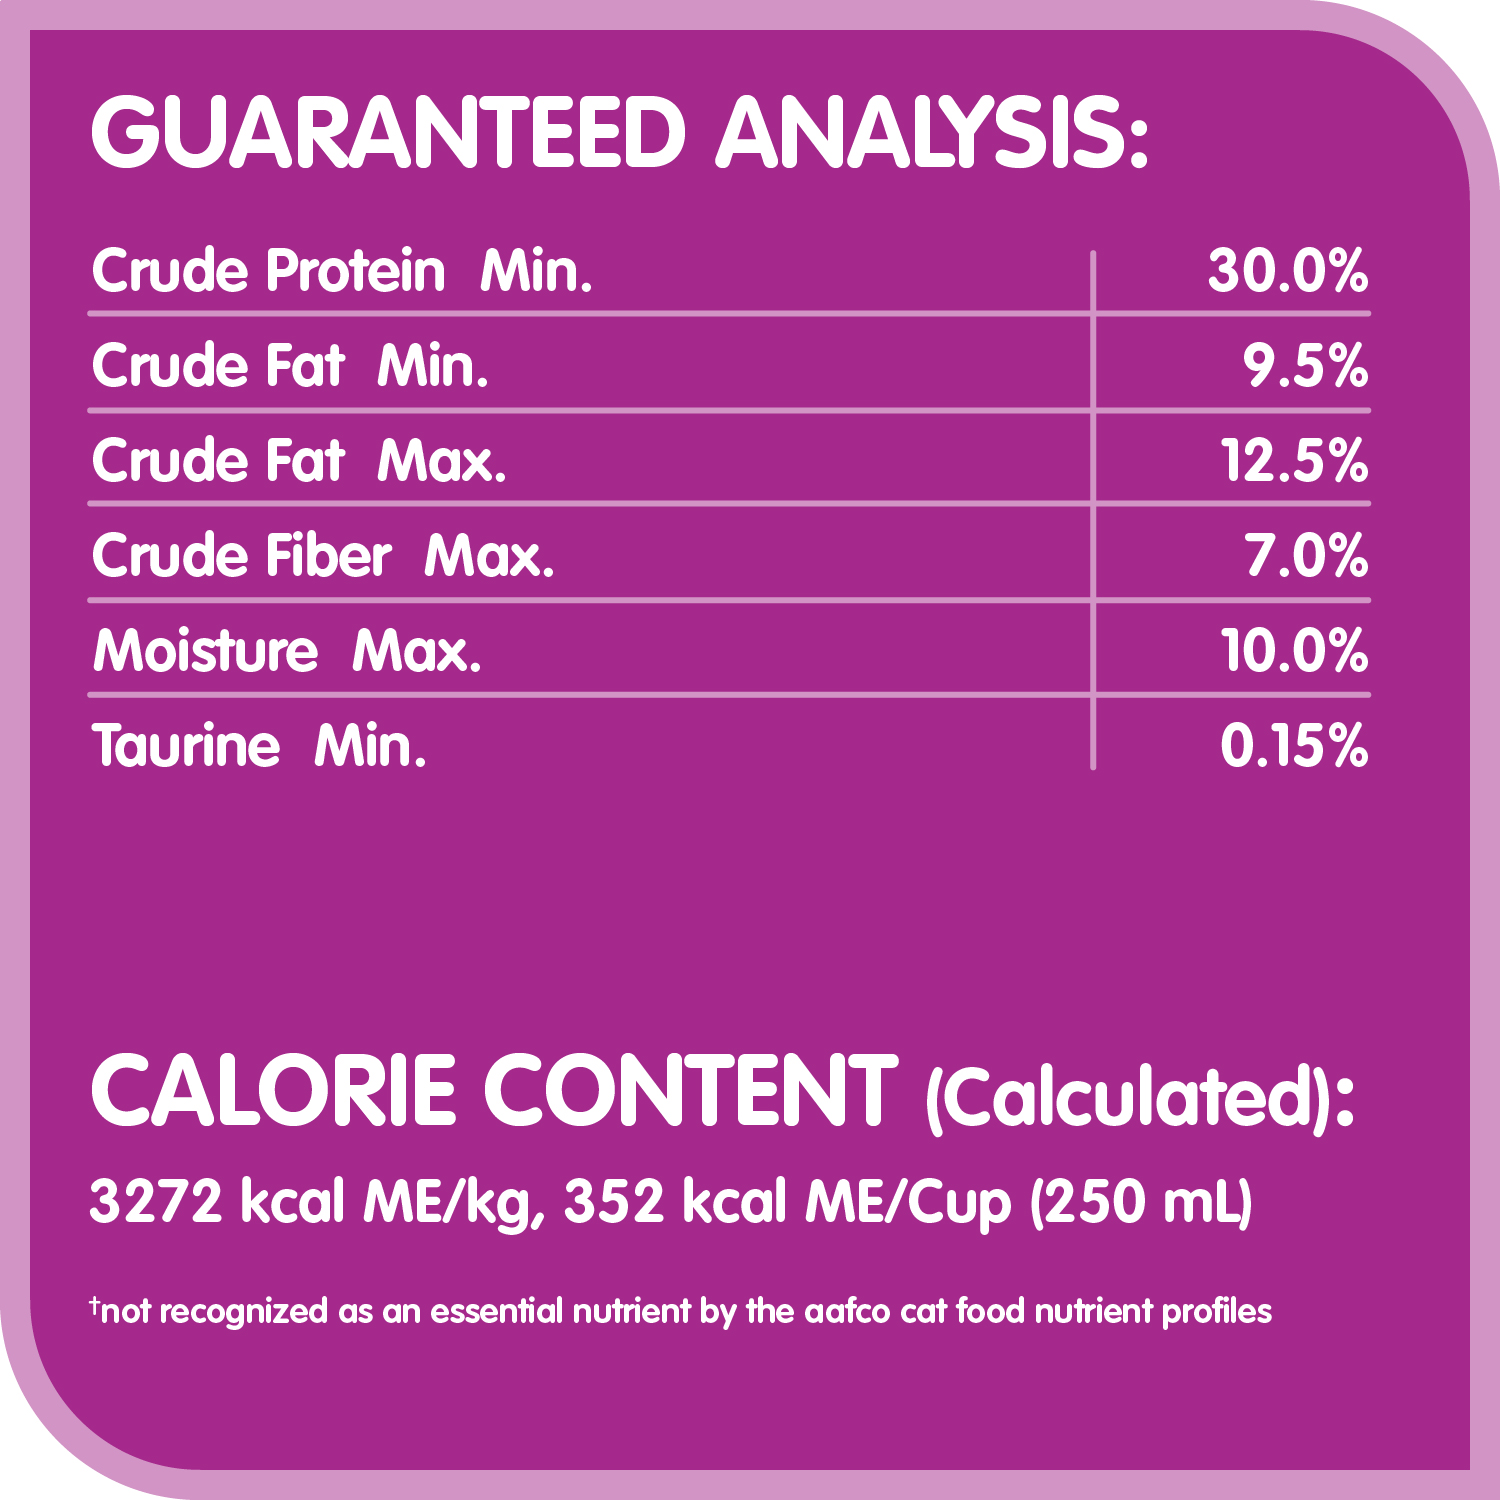 WHISKAS® Indoor with Real Chicken, 1.5kg guaranteed analysis image